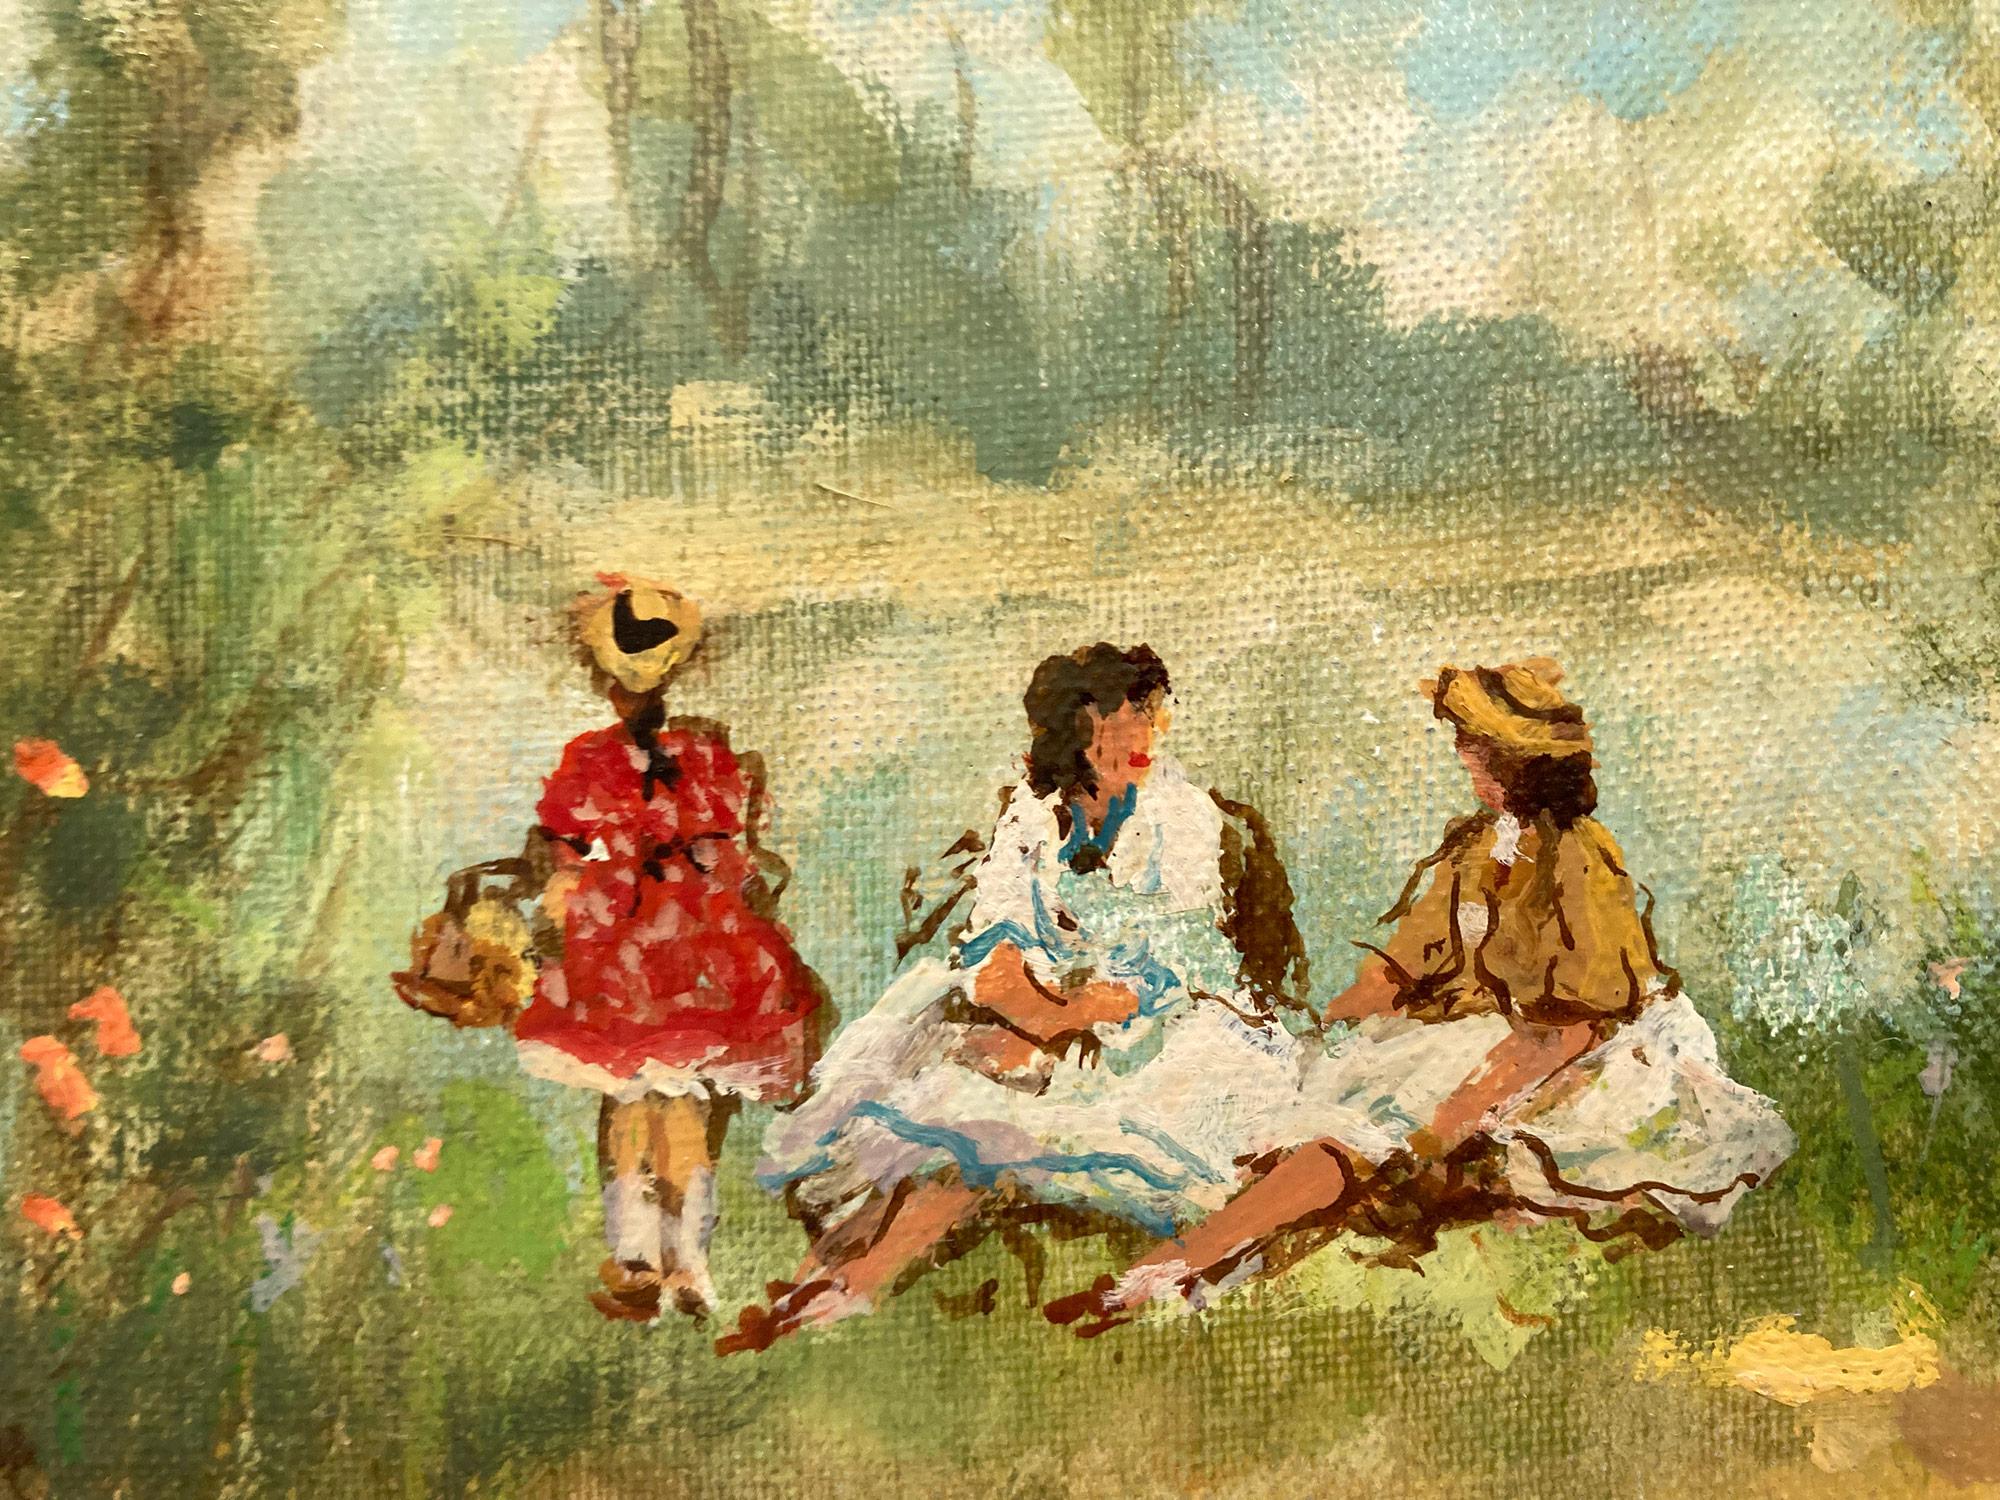 A stunning oil painting scene depicting figures in the park by the Lakeside on a sunny day done in the 20th Century. The vibrant colors and impressionistic brushwork is done with both detail and precision. The people are depicted on a beautiful